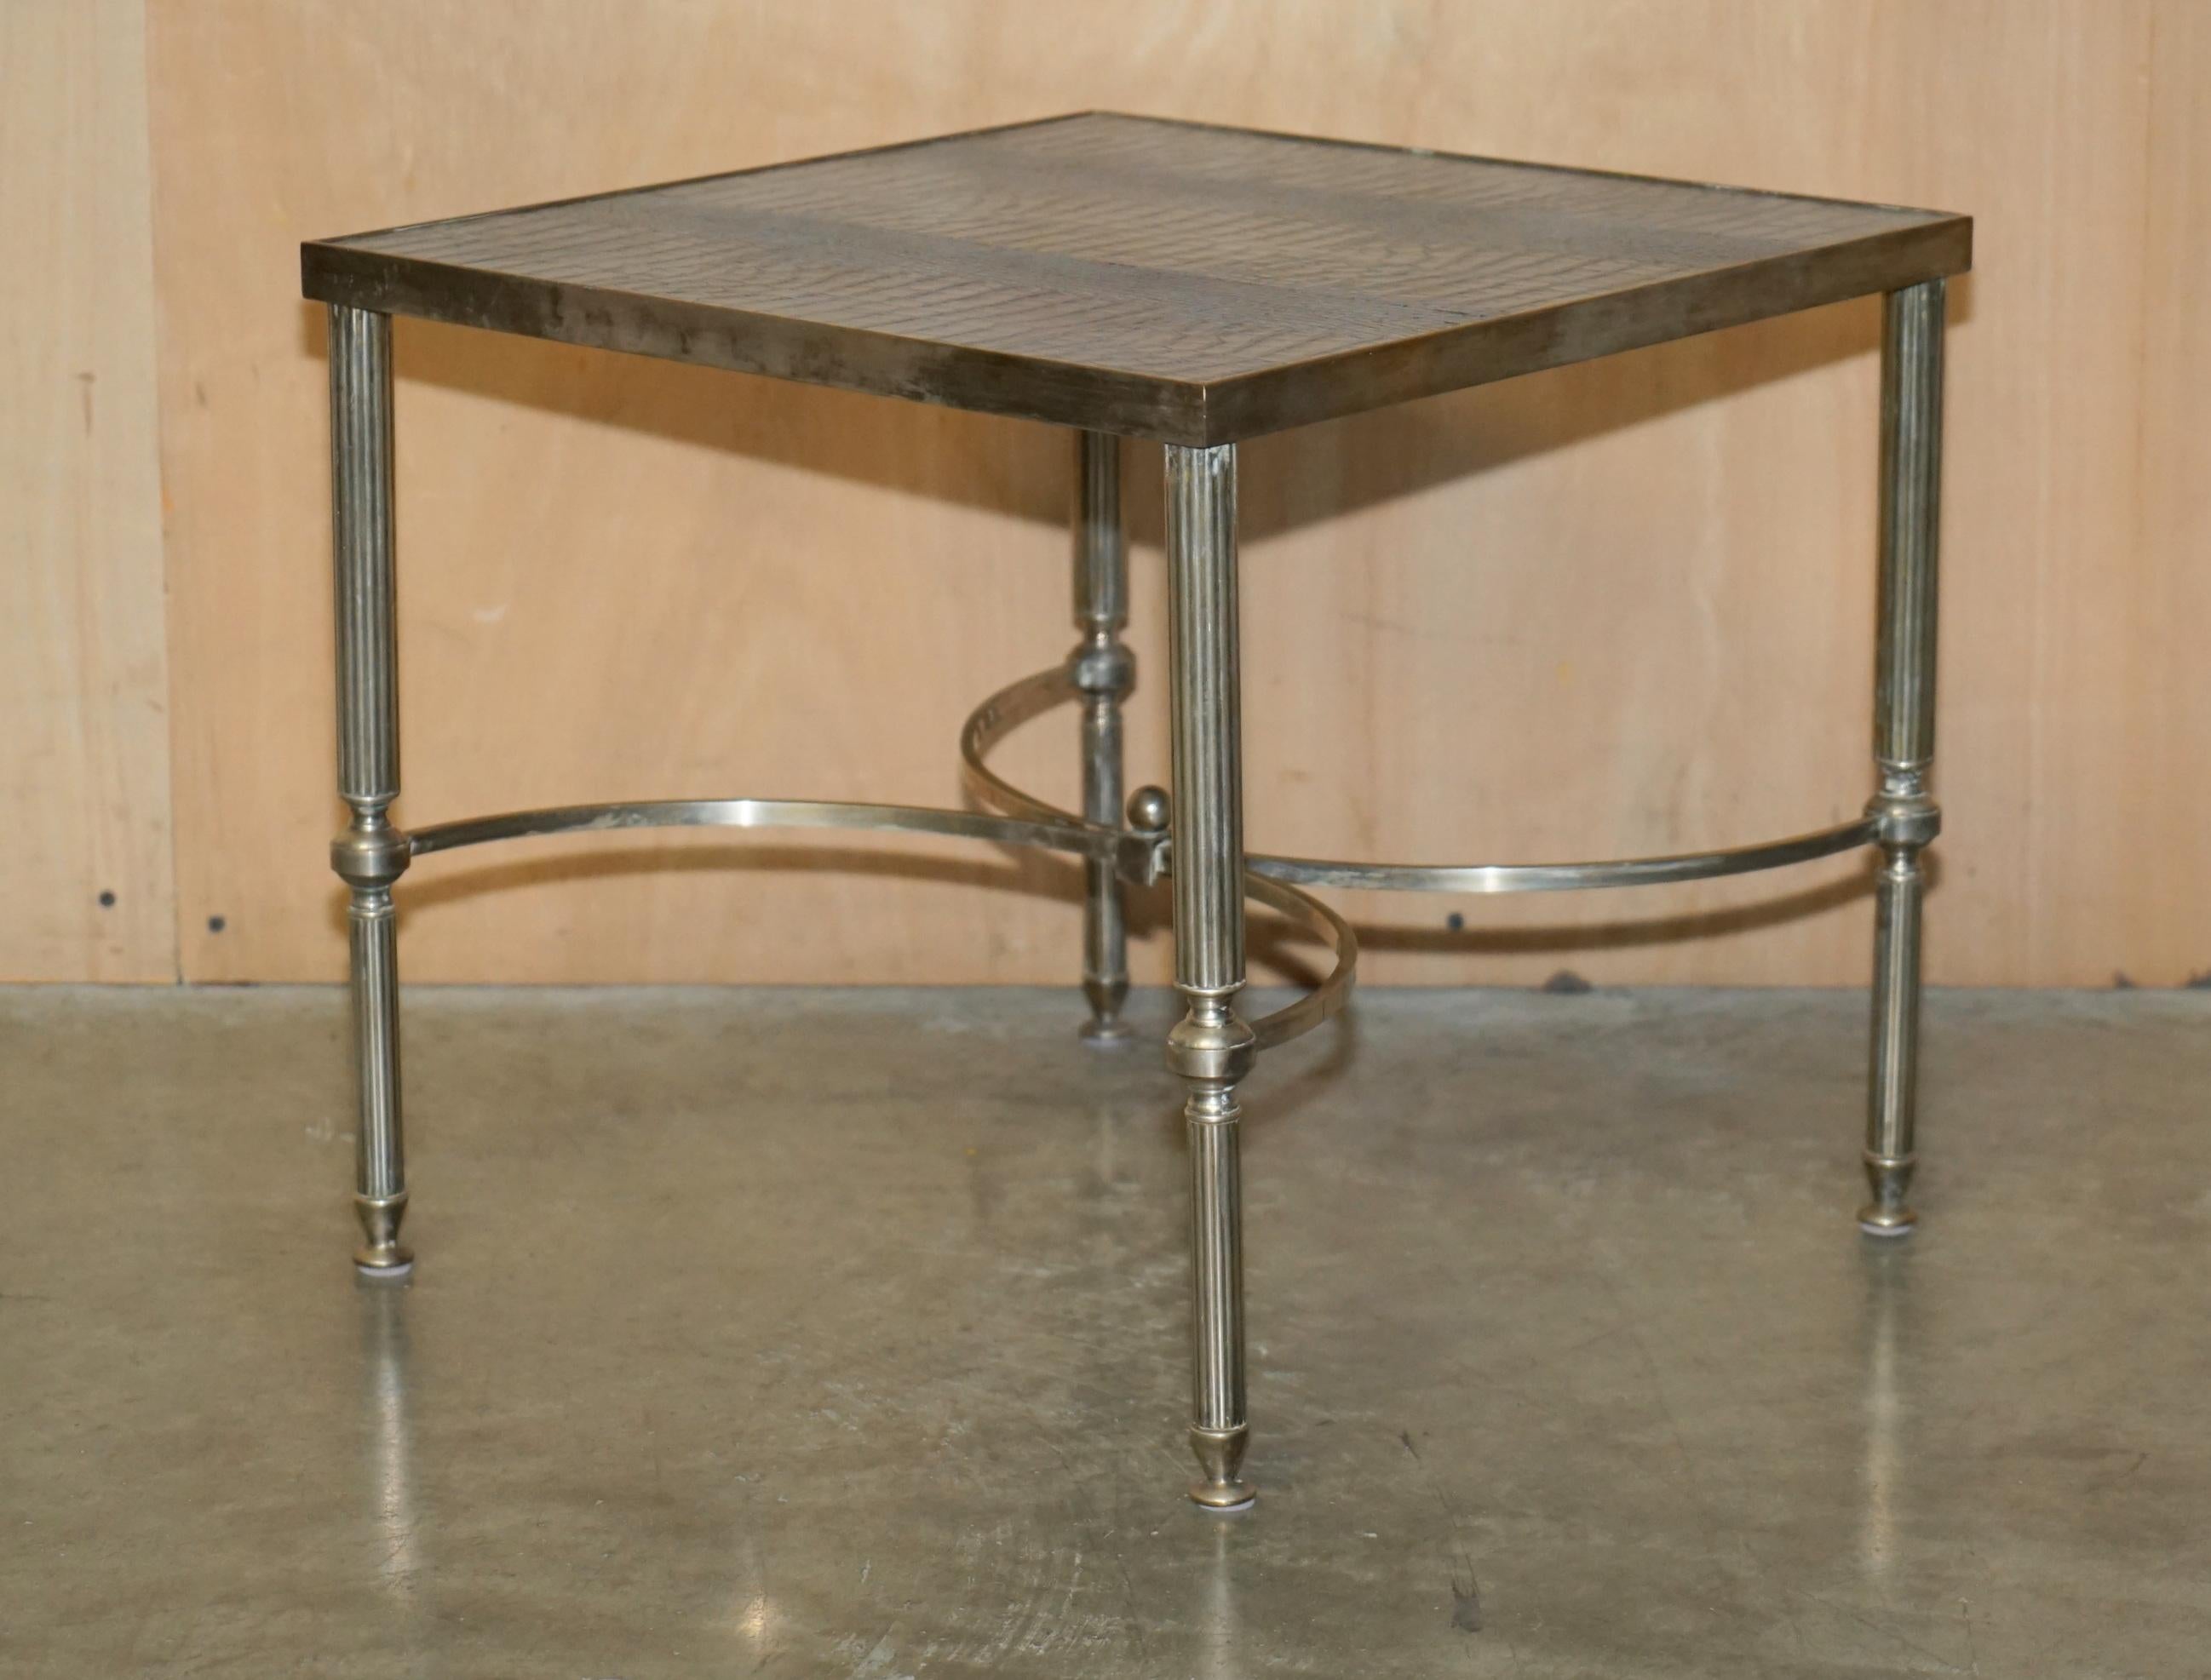 PAiR OF SQUARE VINTAGE CHROME CROCODILE ALLIGATOR LEATHER PATINA SIDE TABLES For Sale 9